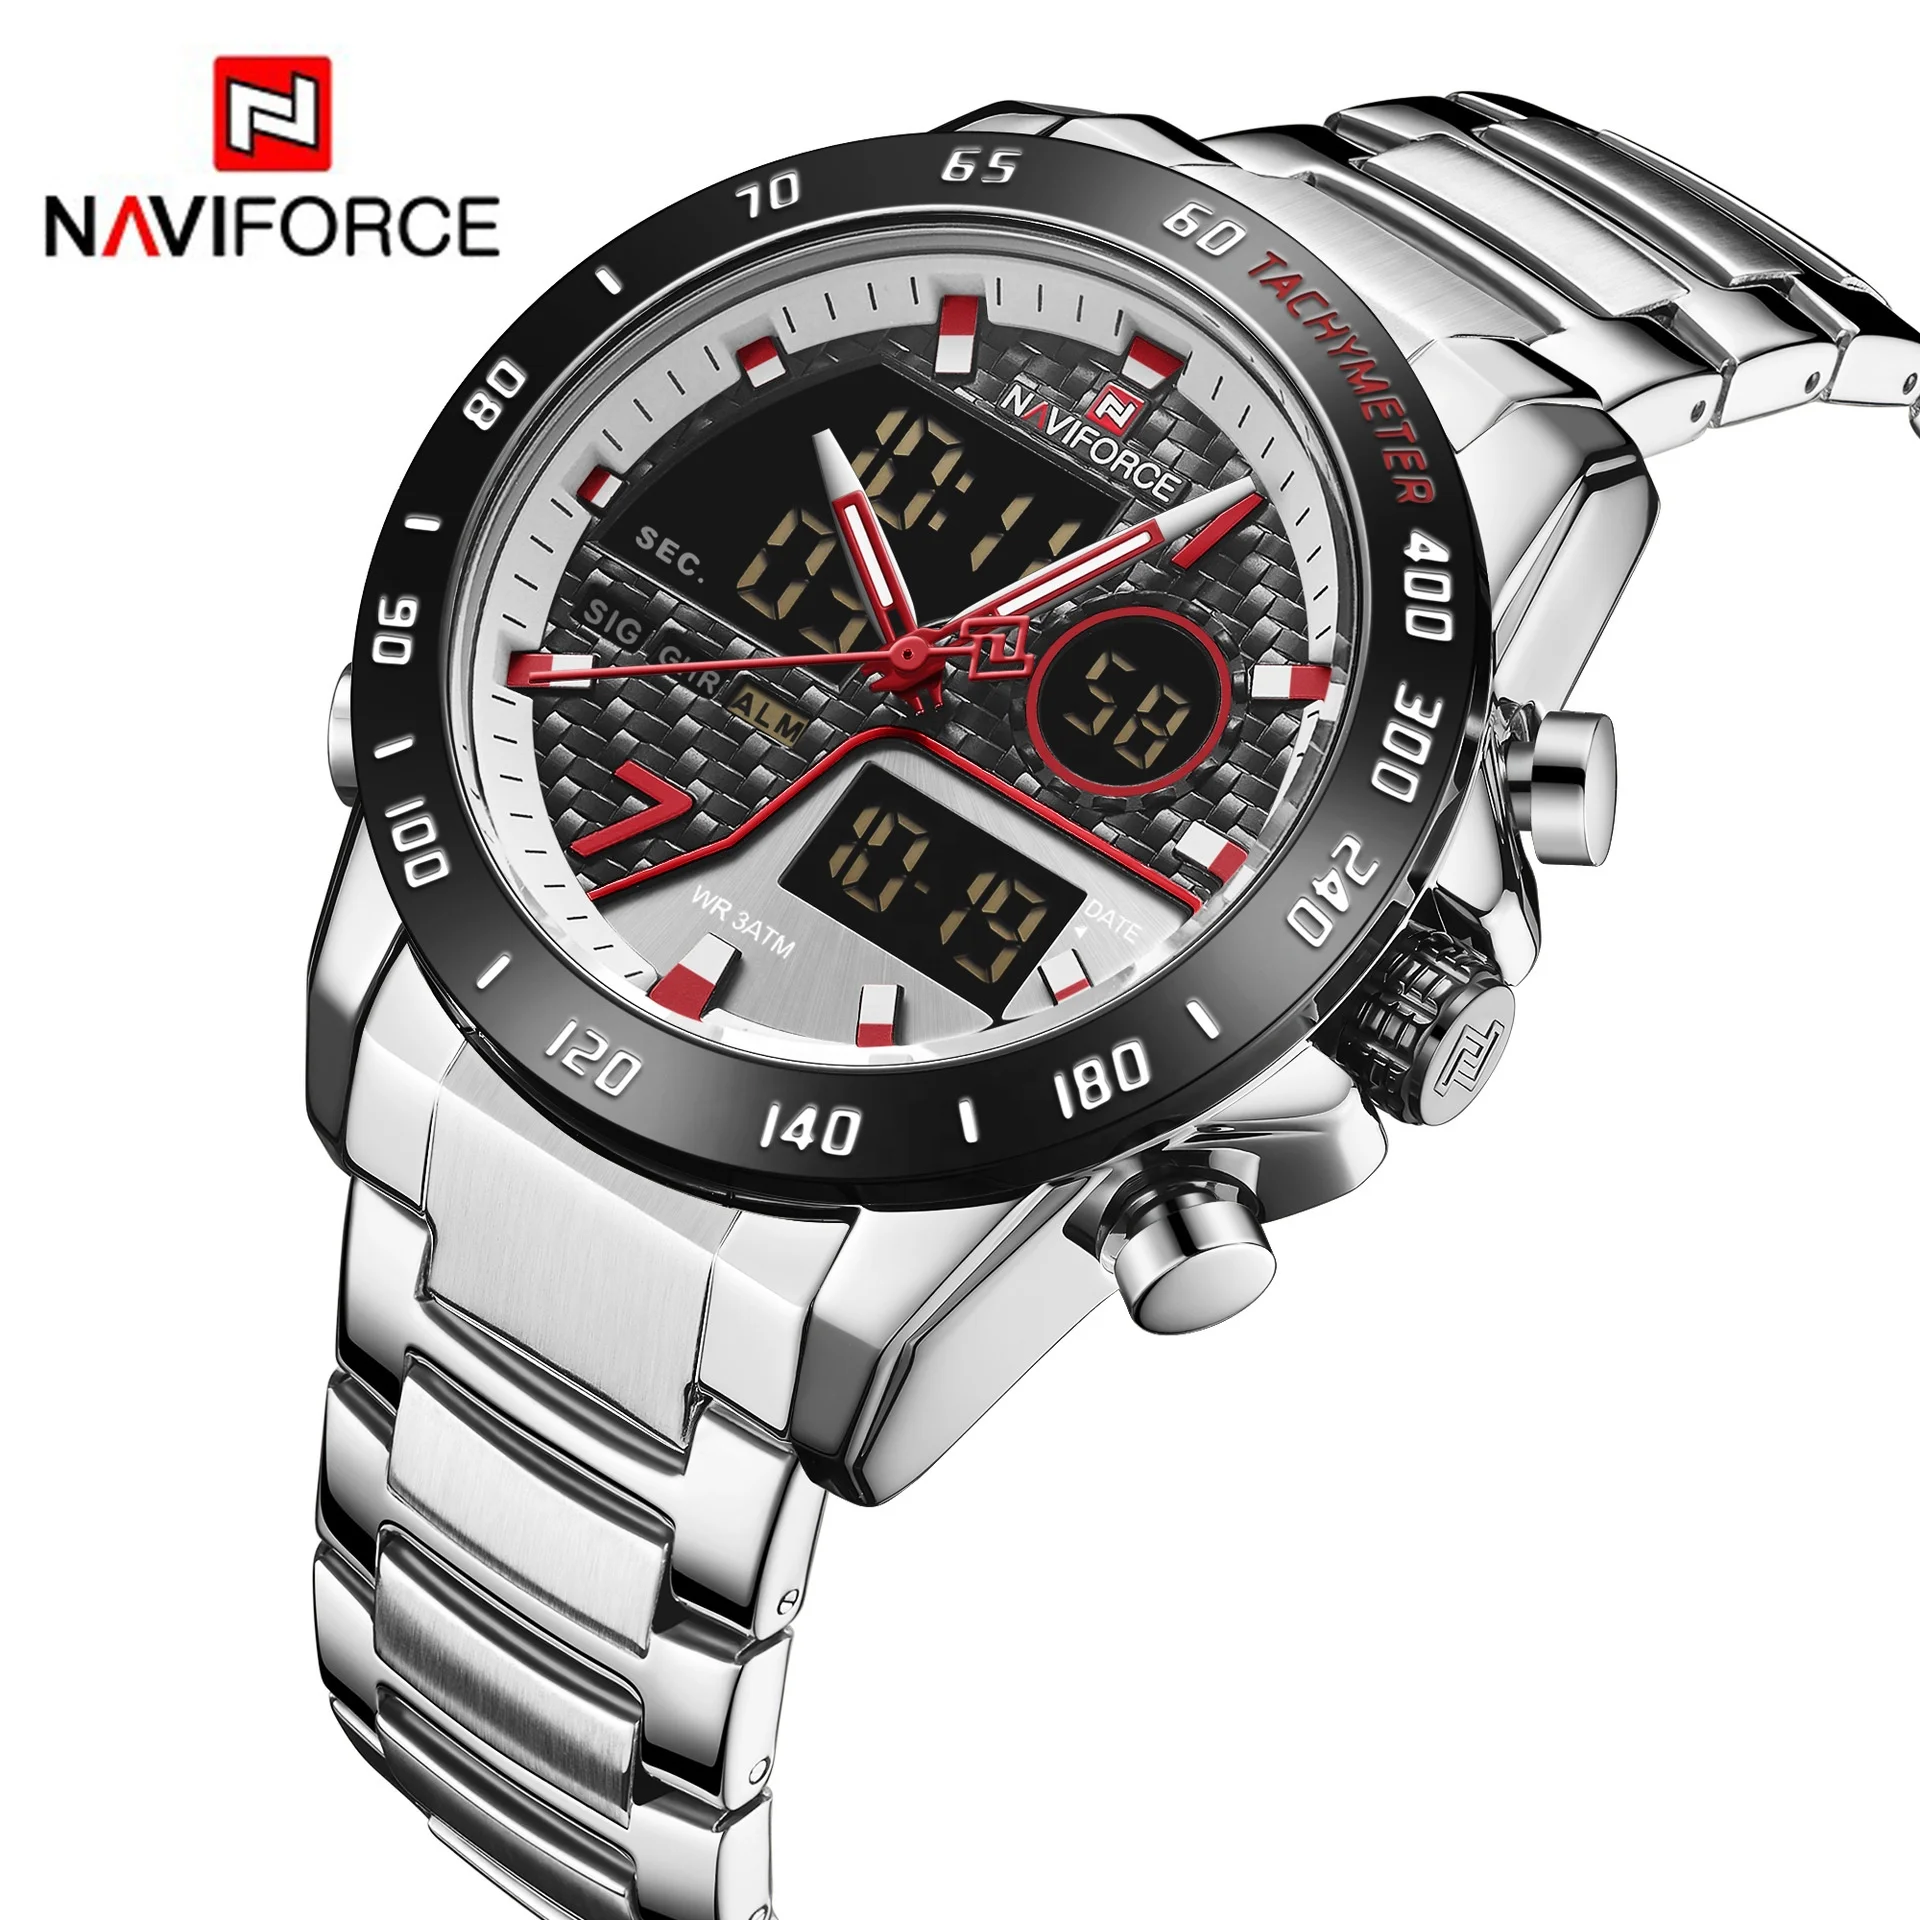 

NAVIFORCE 9171 Hot Sale Luxury Men's Fashion Watches with Stainless Steel Dual Display Waterproof Sport Military Wrist Watches, According to reality